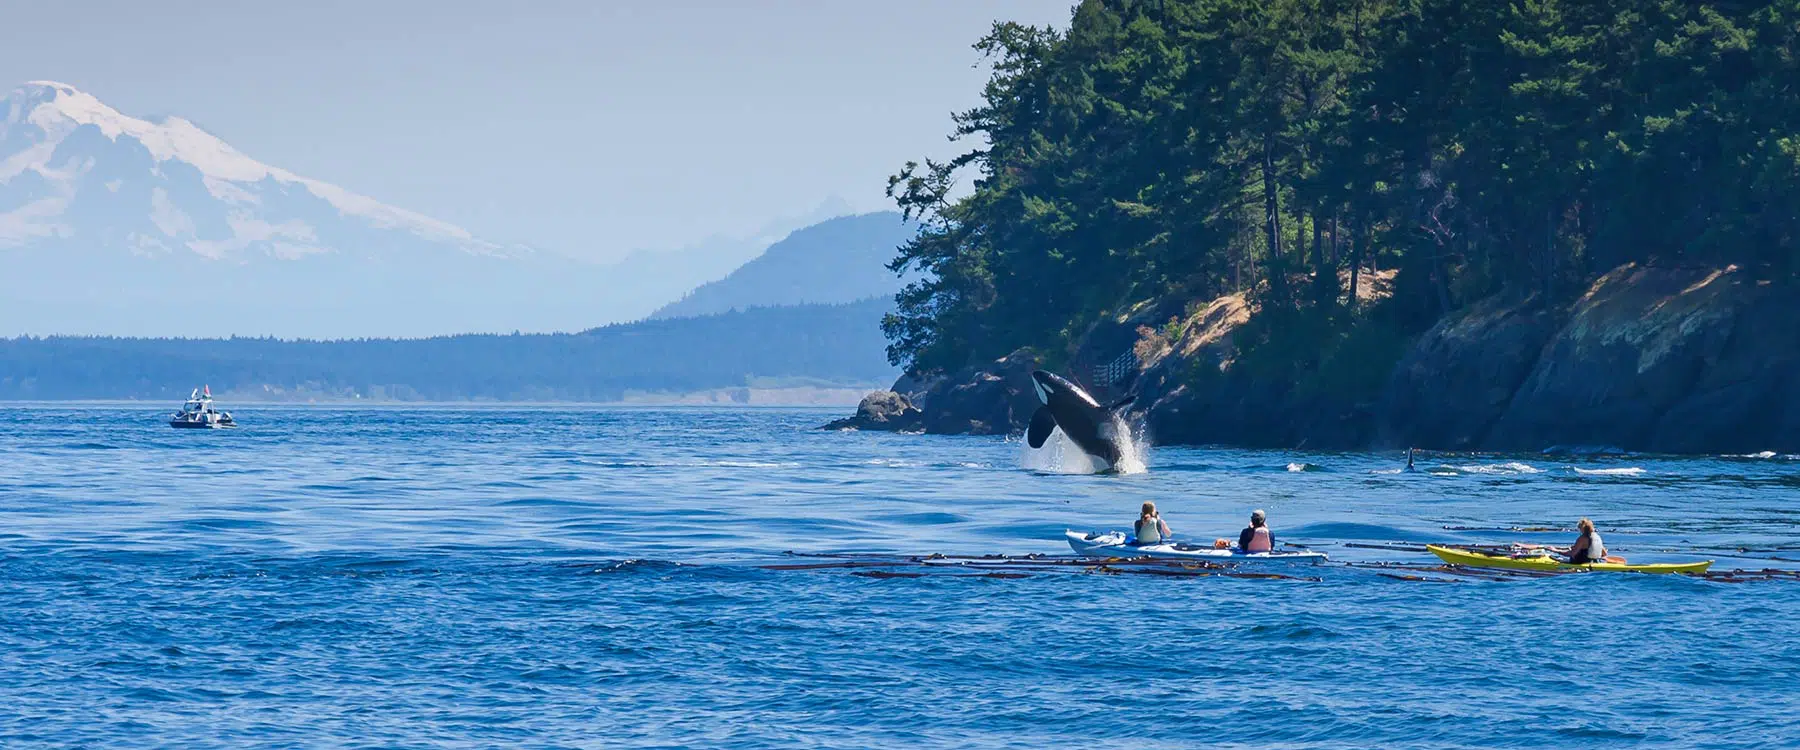 kayaking and orcas